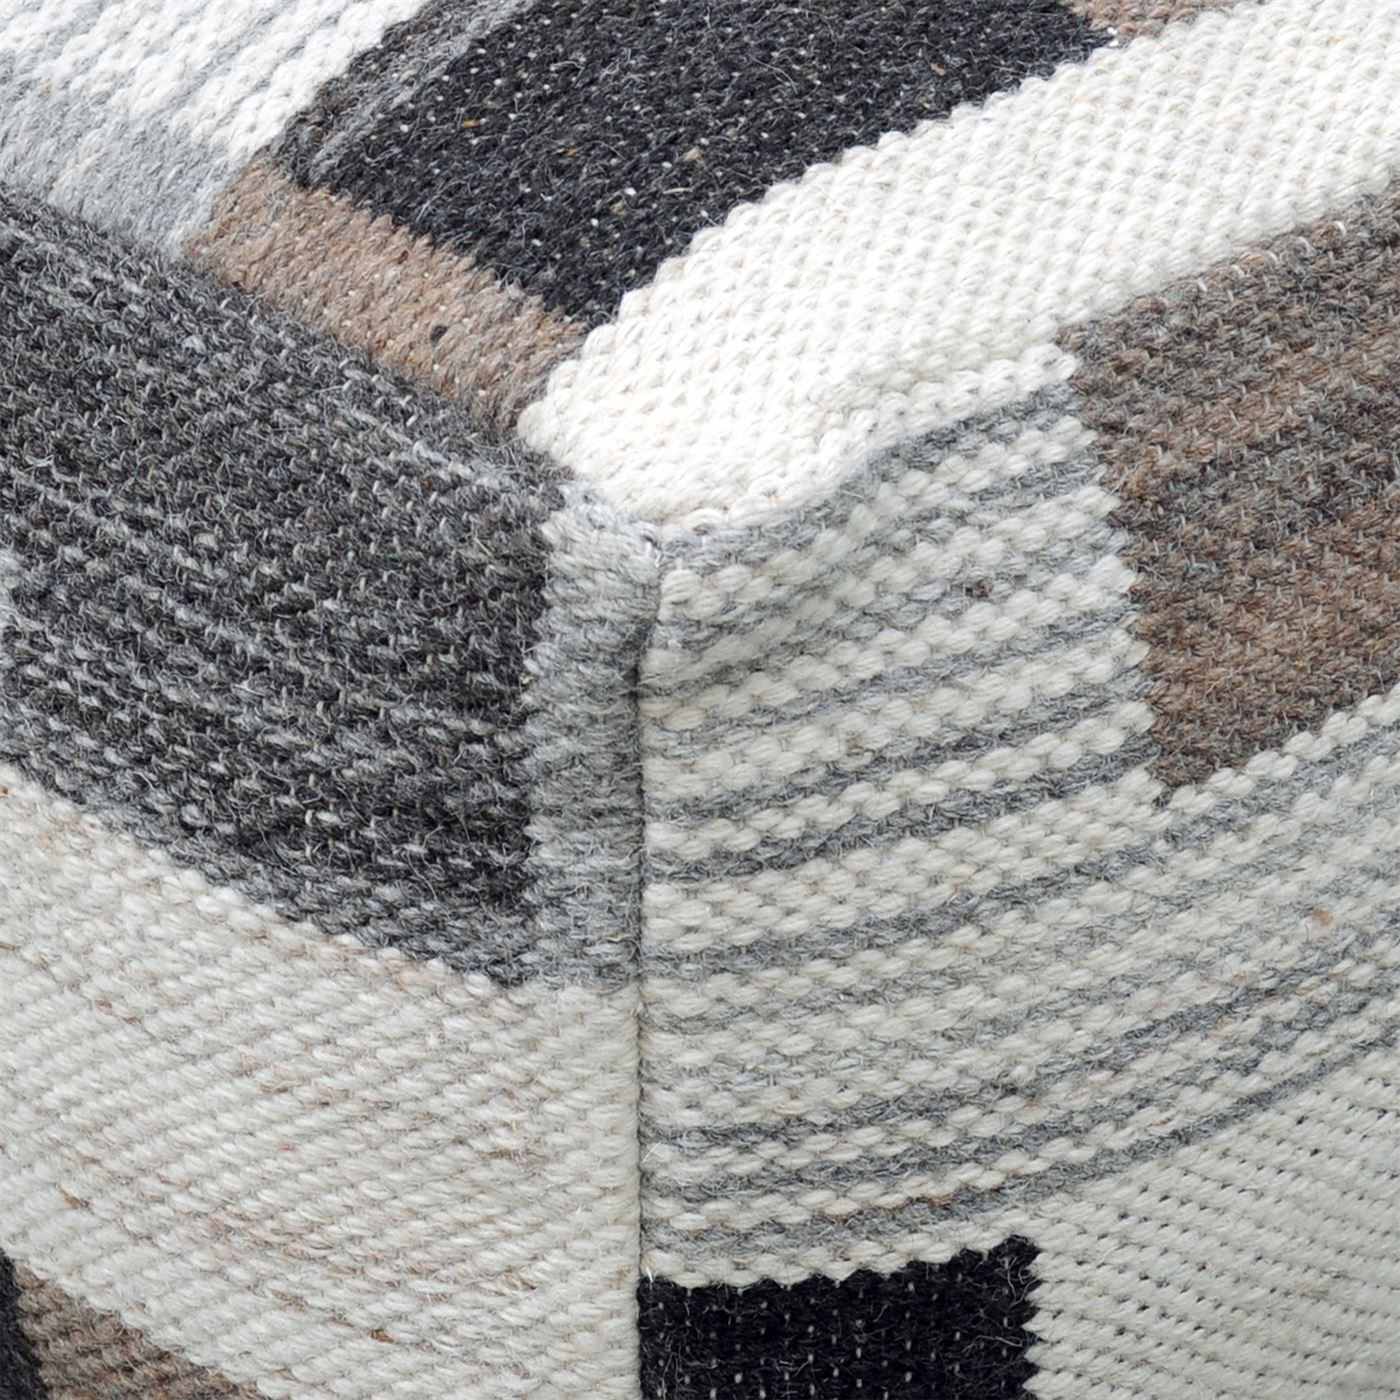 Mazzer Pouf, Wool, Cotton, Natural White, Natural, Pitloom, Flat Weave 